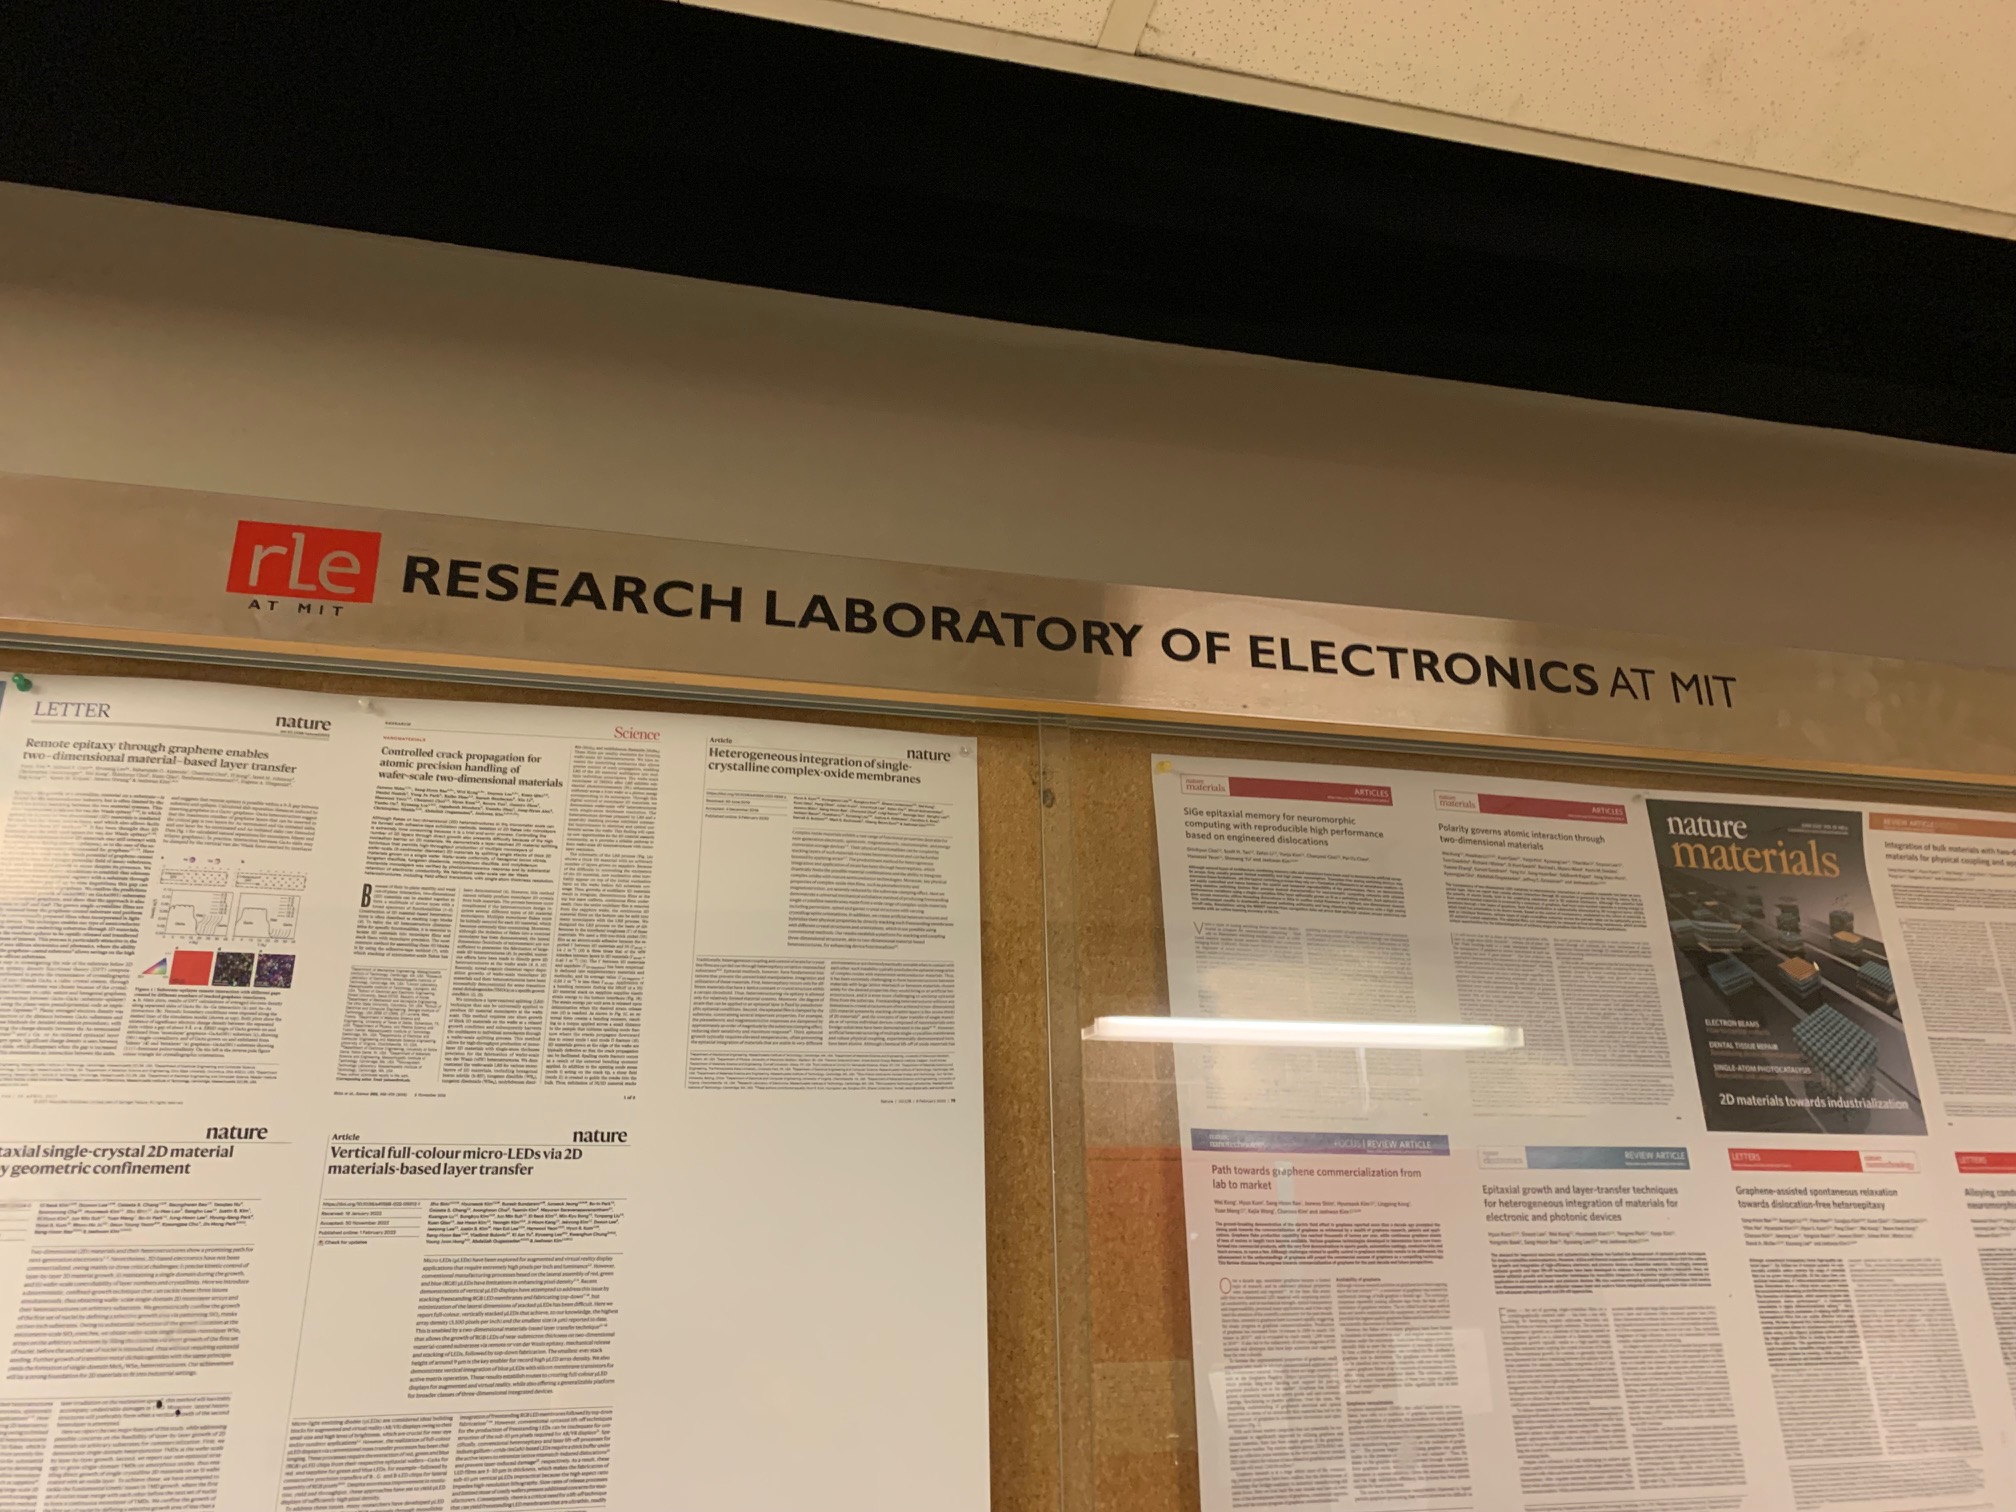 massachusetts Institure of Technology The Research Laboratory of Electronics